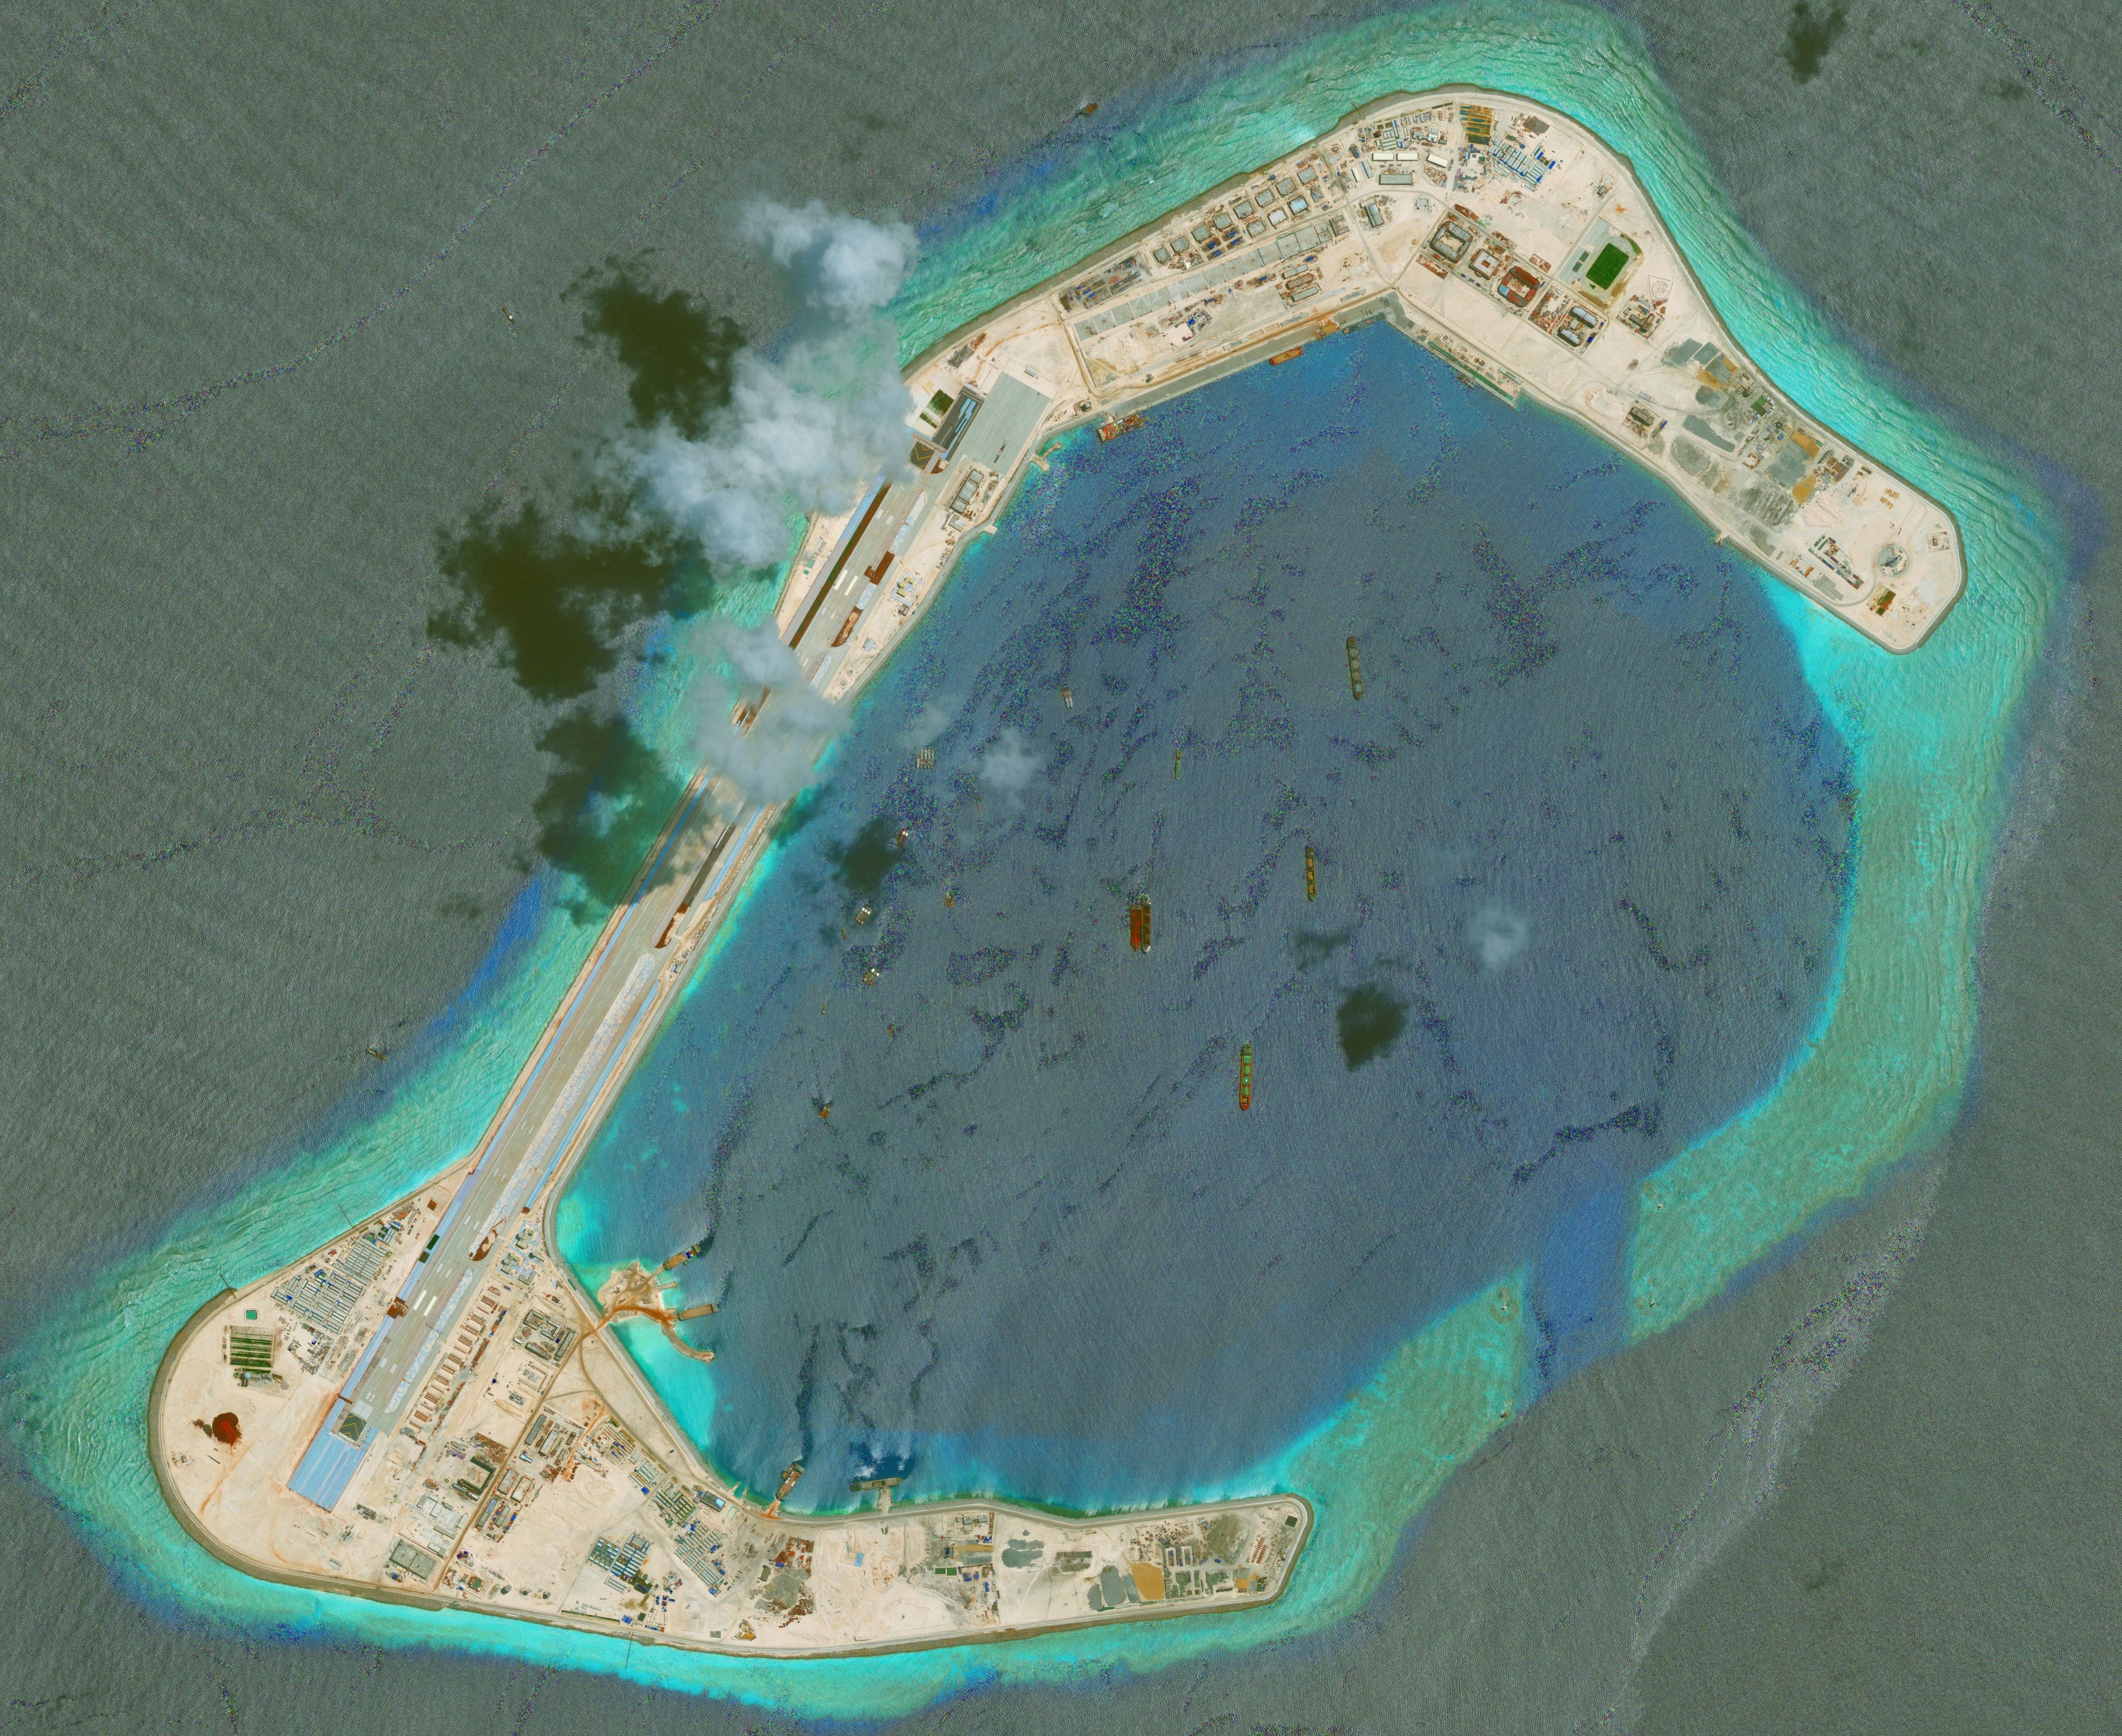 DigitalGlobe imagery of the Subi Reef in the South China Sea, a part of the Spratly Islands group. (DigitalGlobe/ScapeWare3d/Getty Images)